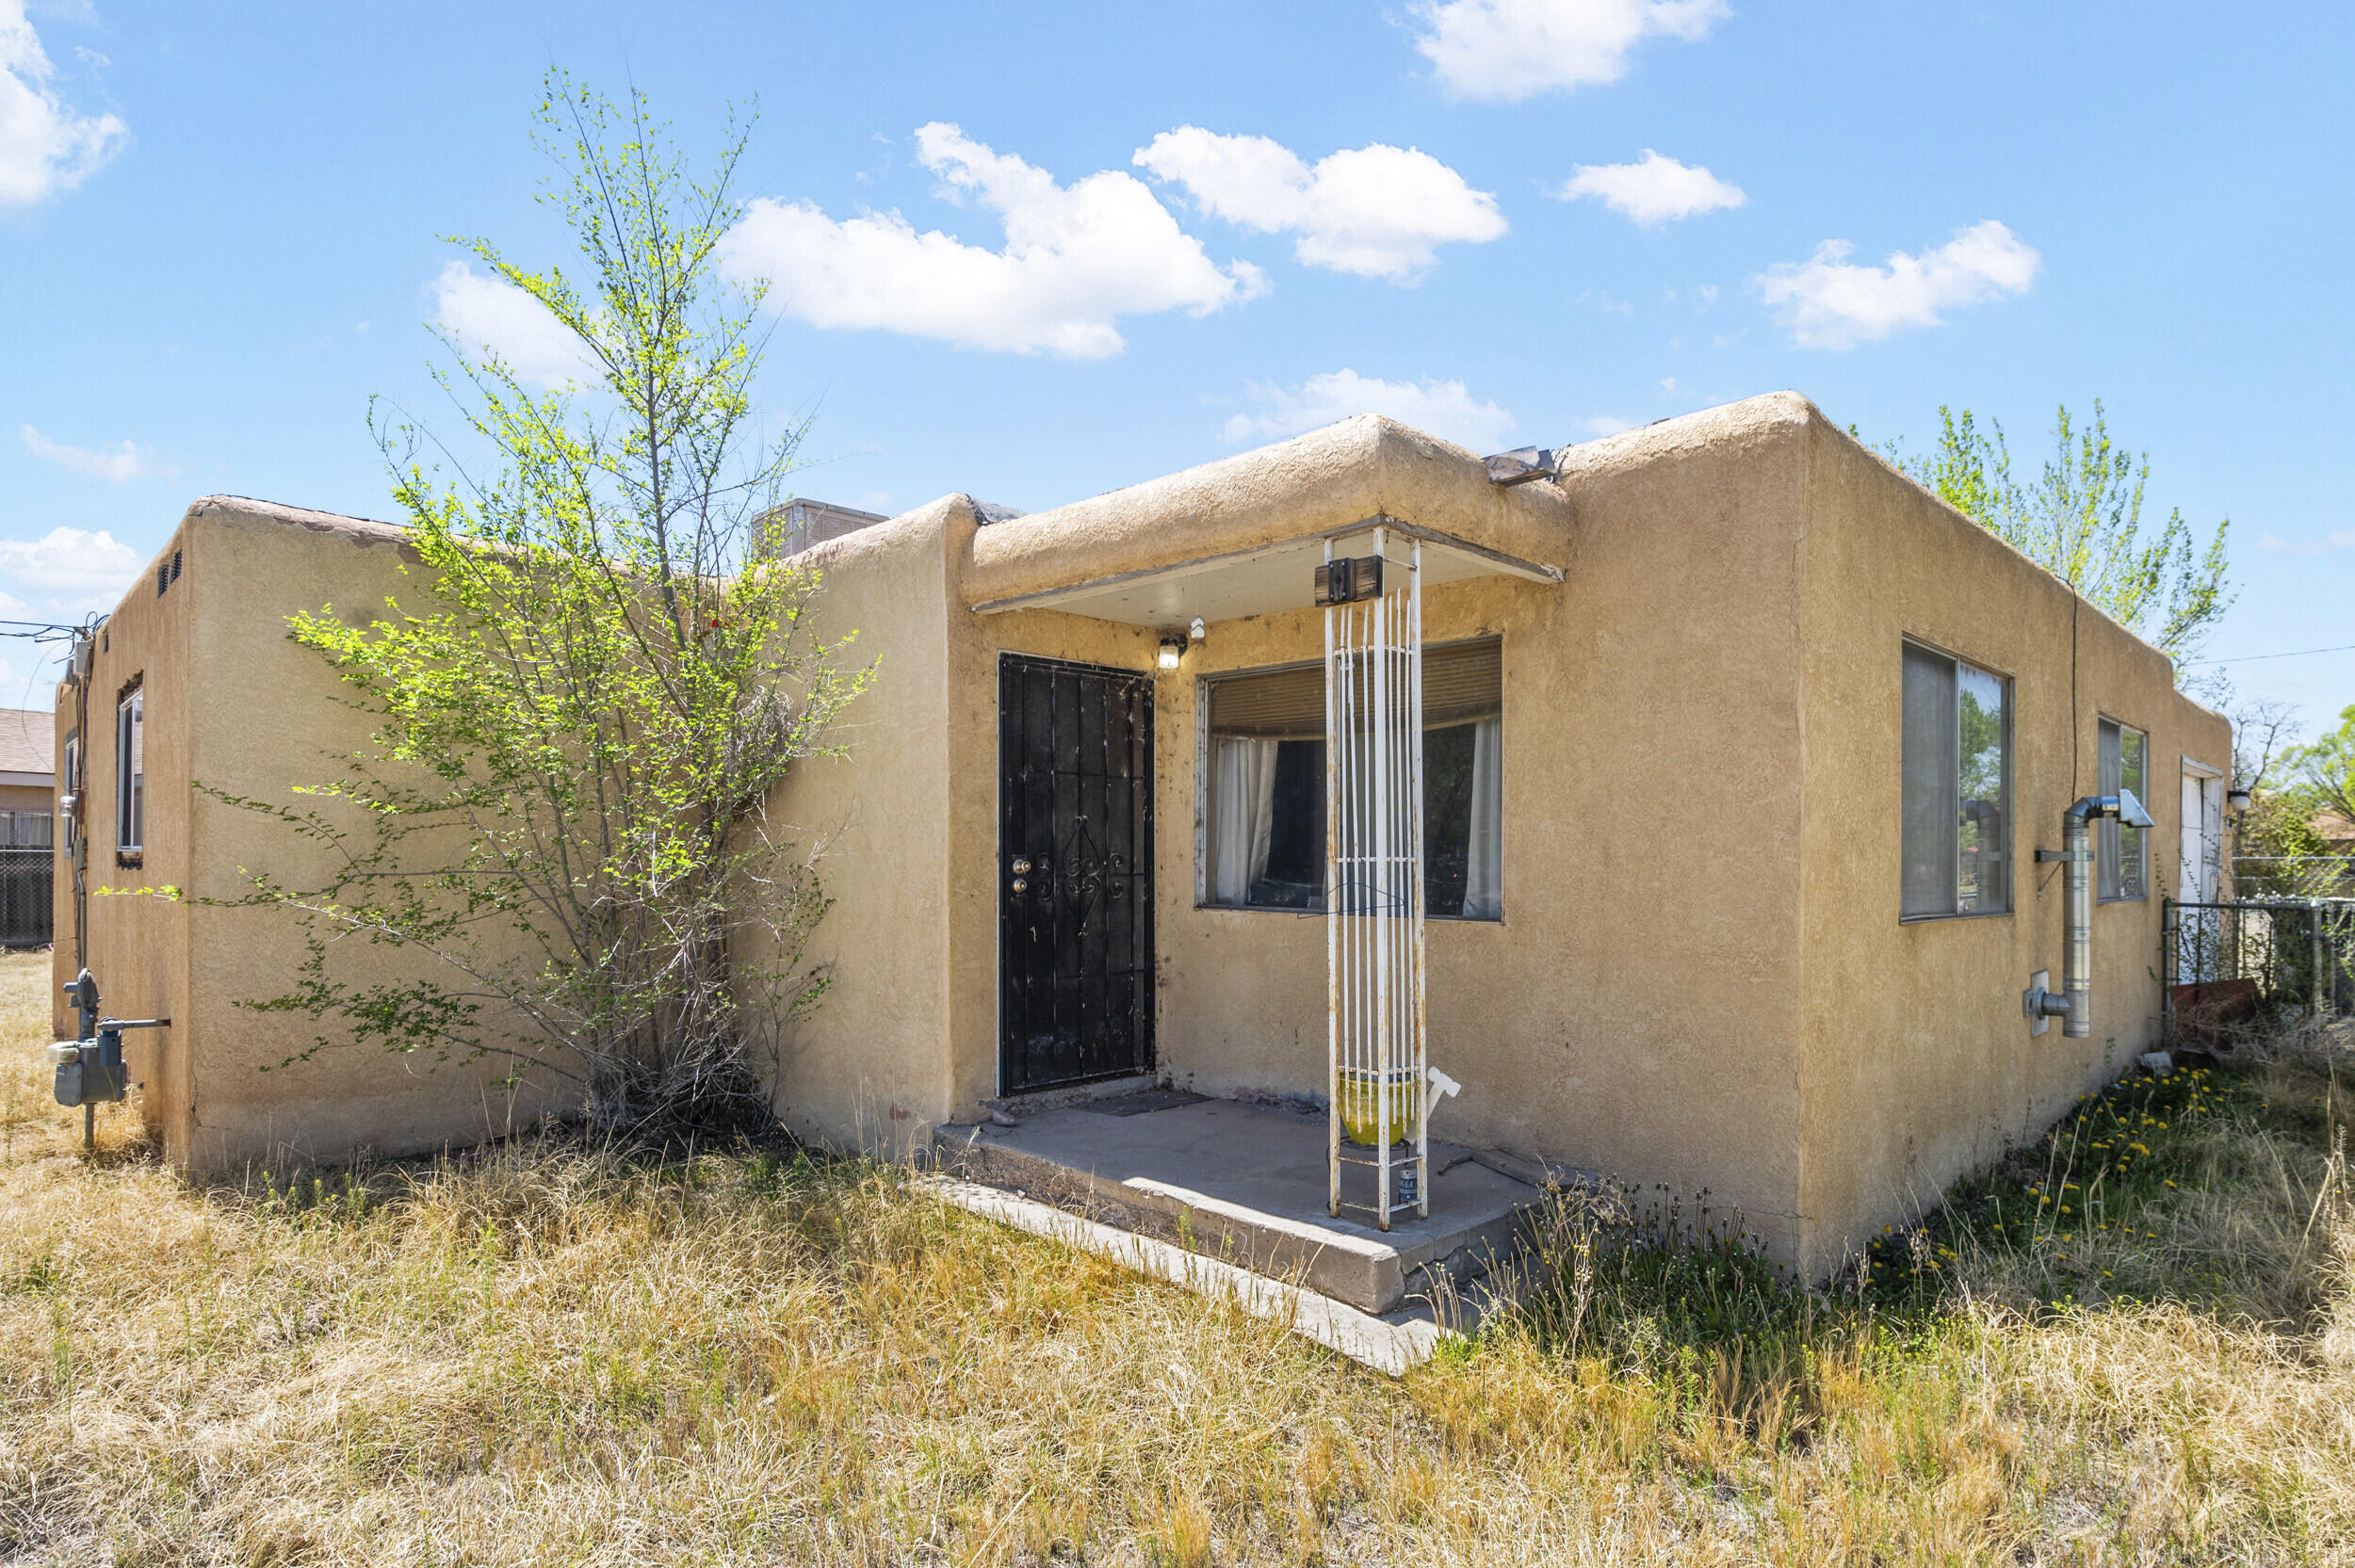 Welome to a wonderful property located in the South Valley. This 3 bedroom, 2 bathroom home offers a half acre of land, private well, and freestanding garage workshop with electricity. With a little work this property can offer a great return.